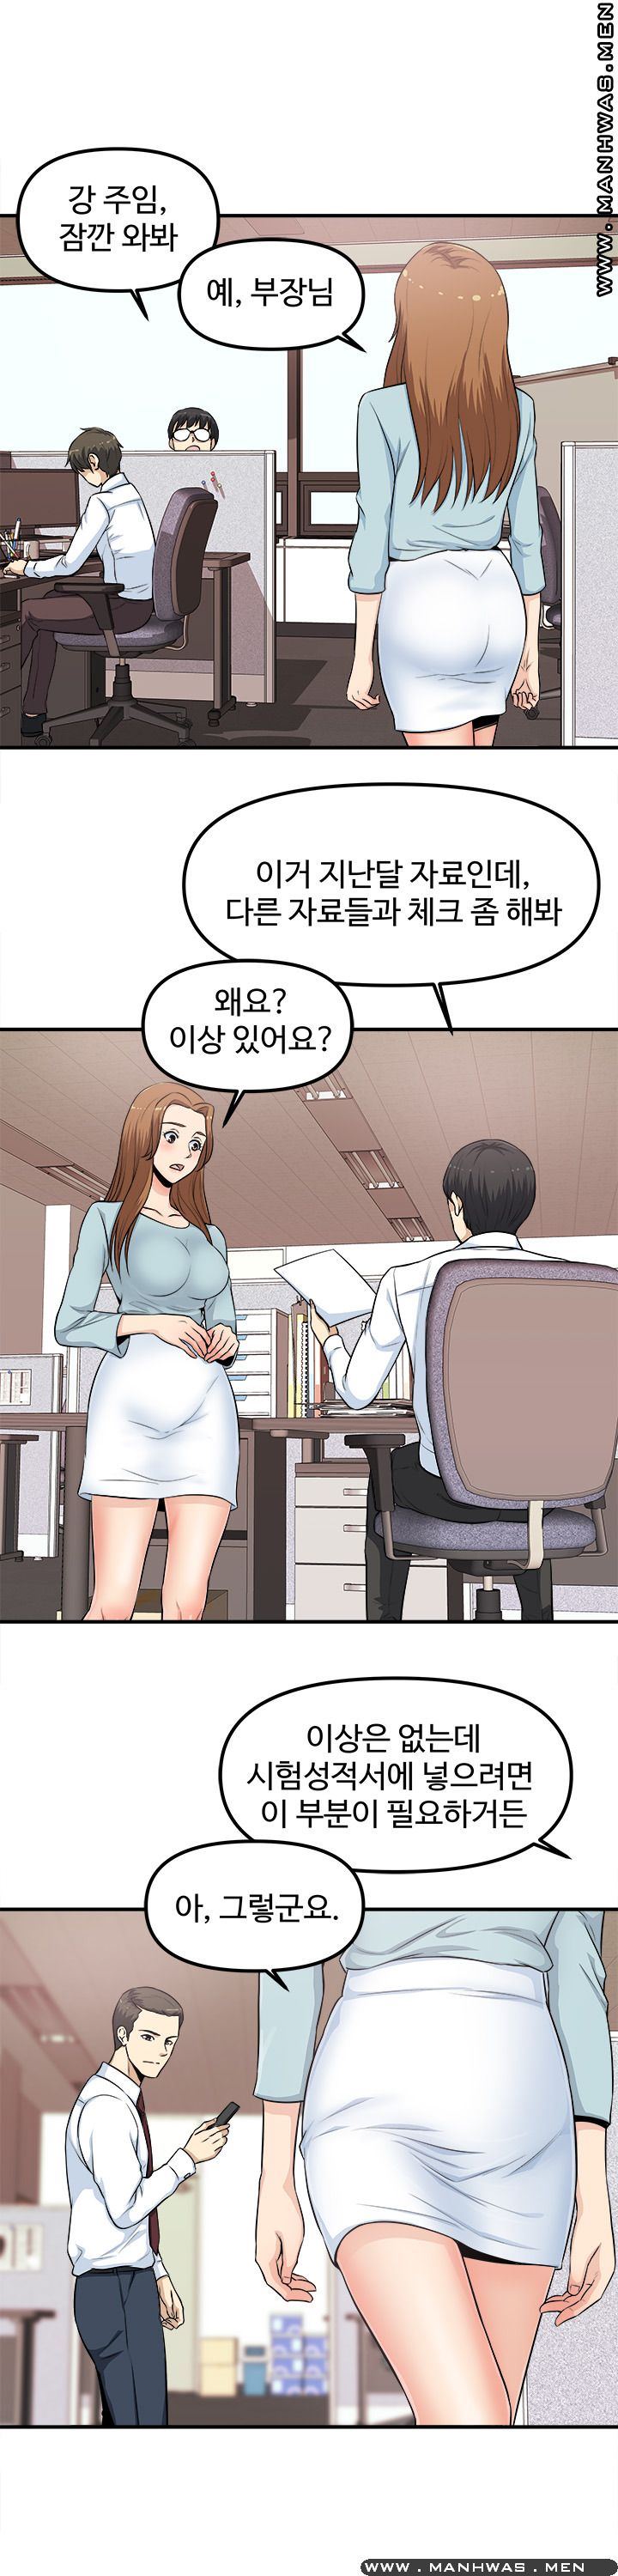 Office Bible Raw - Chapter 5 Page 14